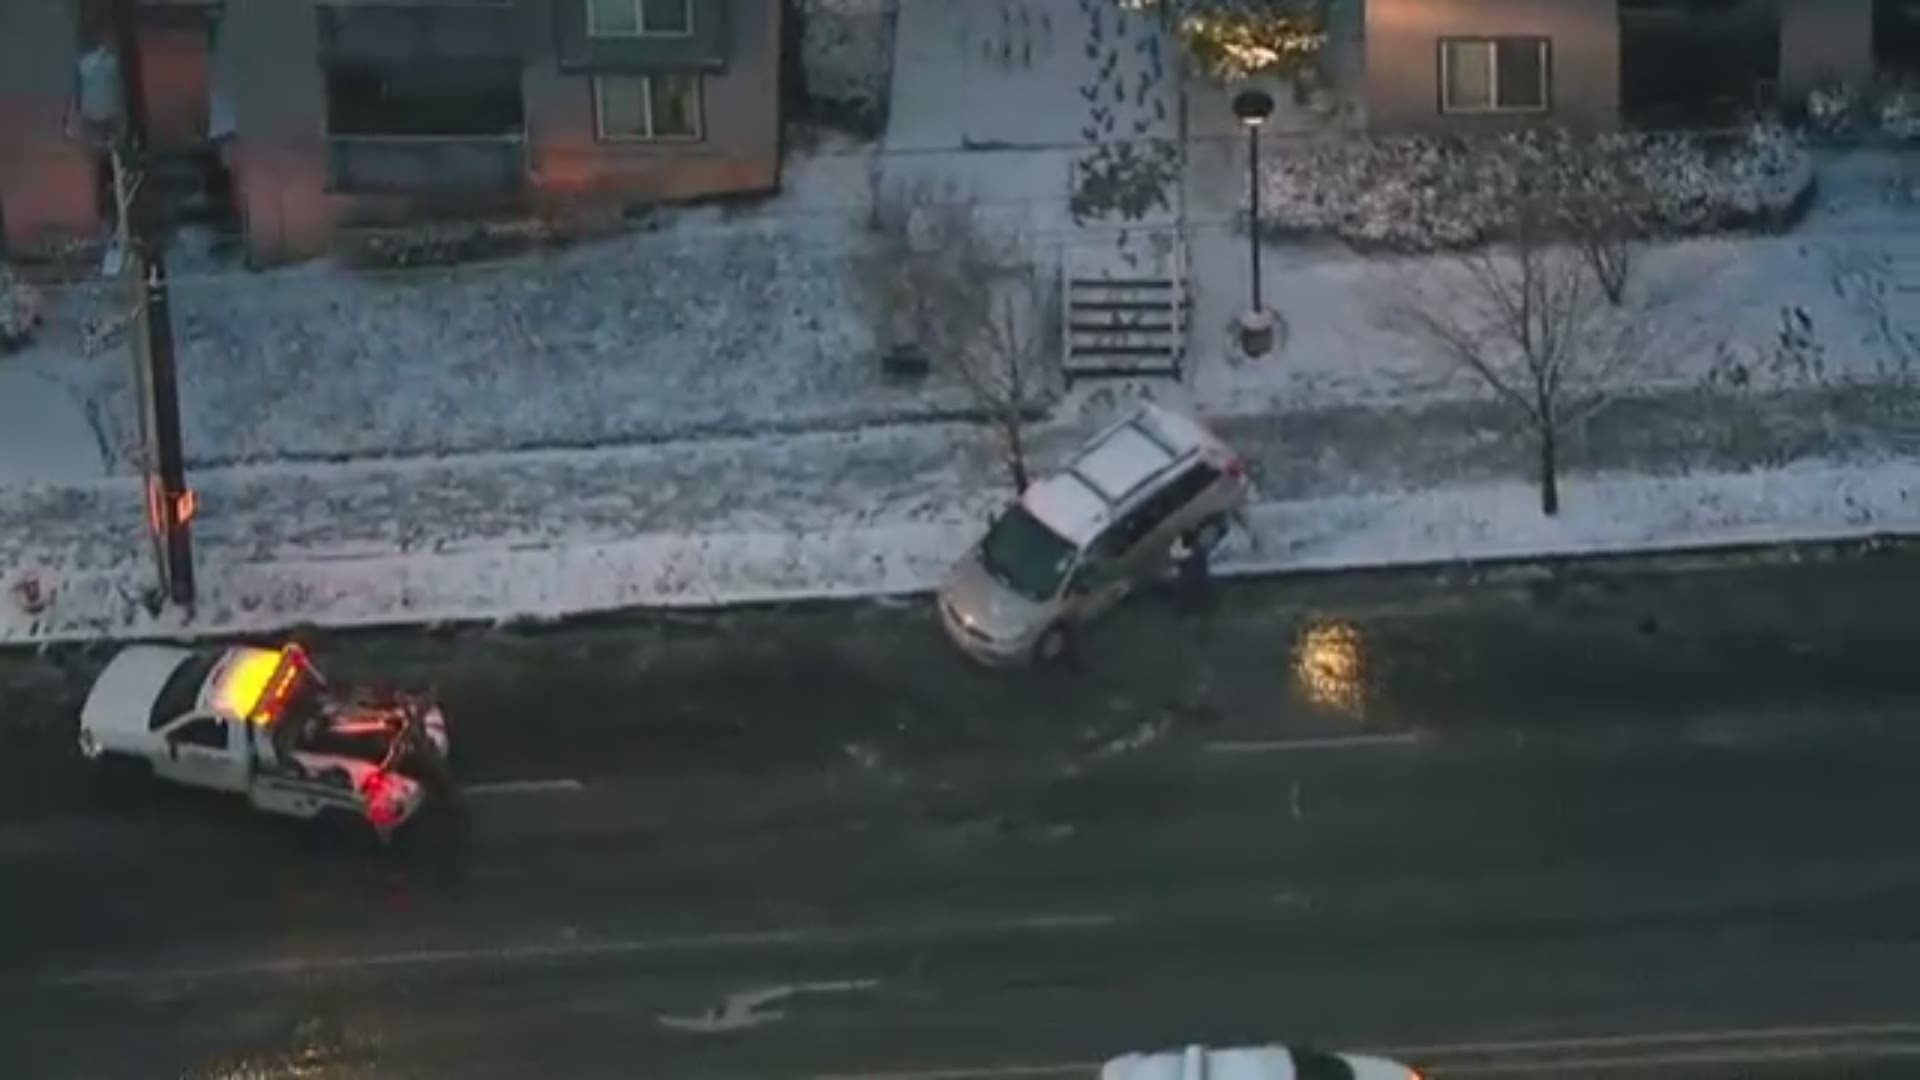 Sky 8 was over Portland during the icy Tuesday morning commute.